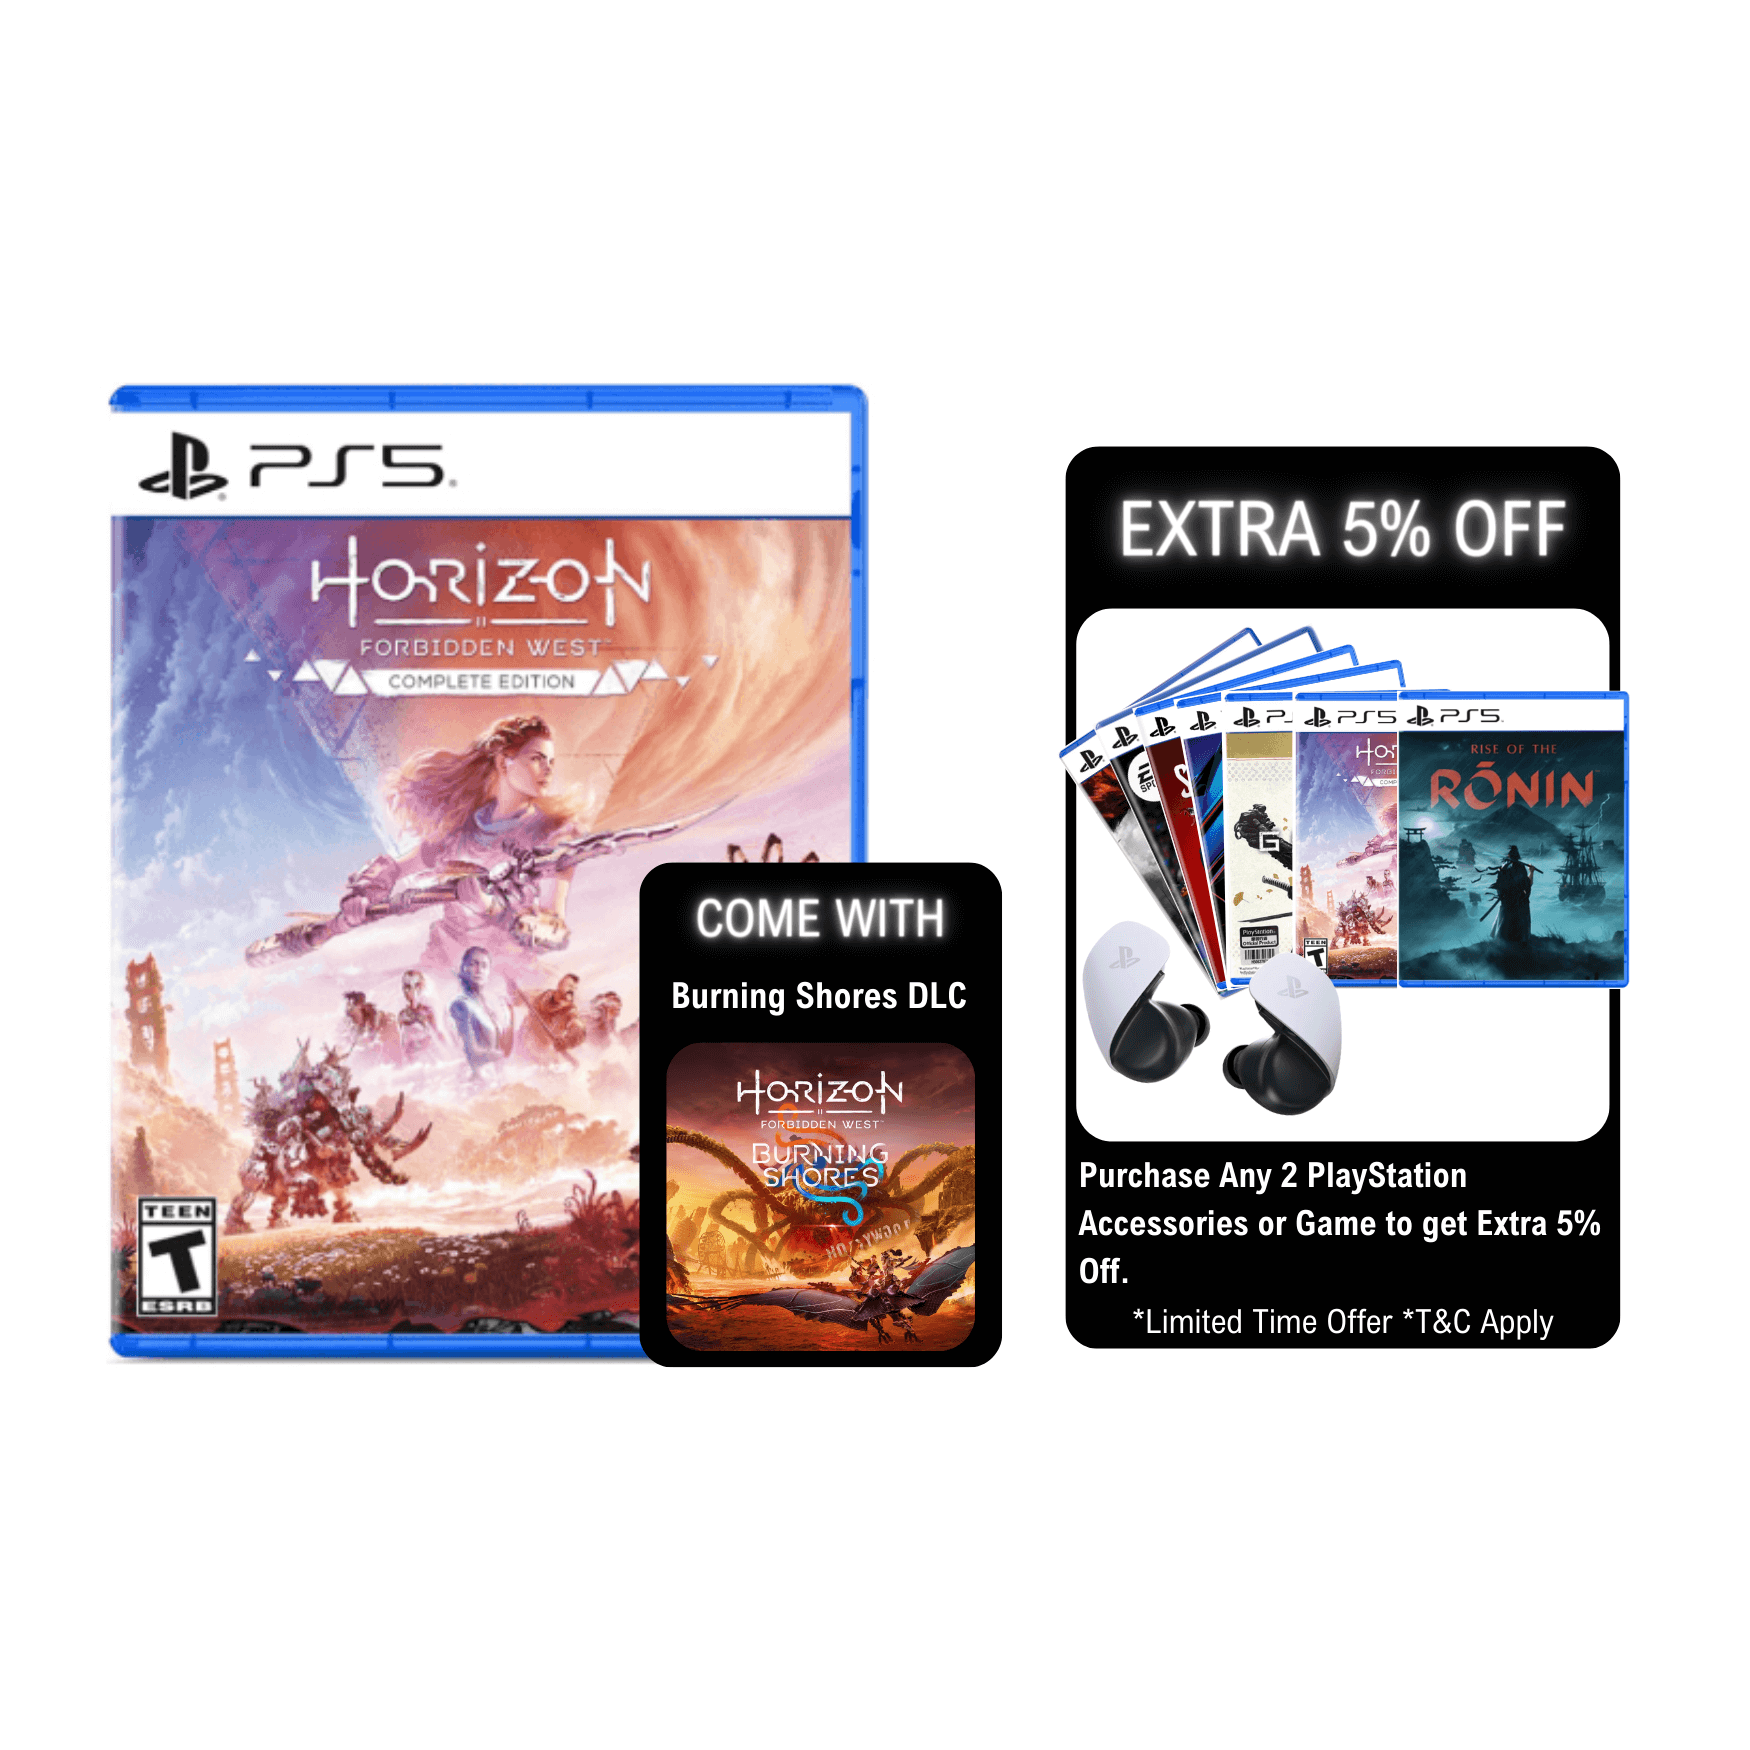 Sony PS5 Game Horizon Forbidden West - Complete Edition [PS5 ANY 2 5% OFF]